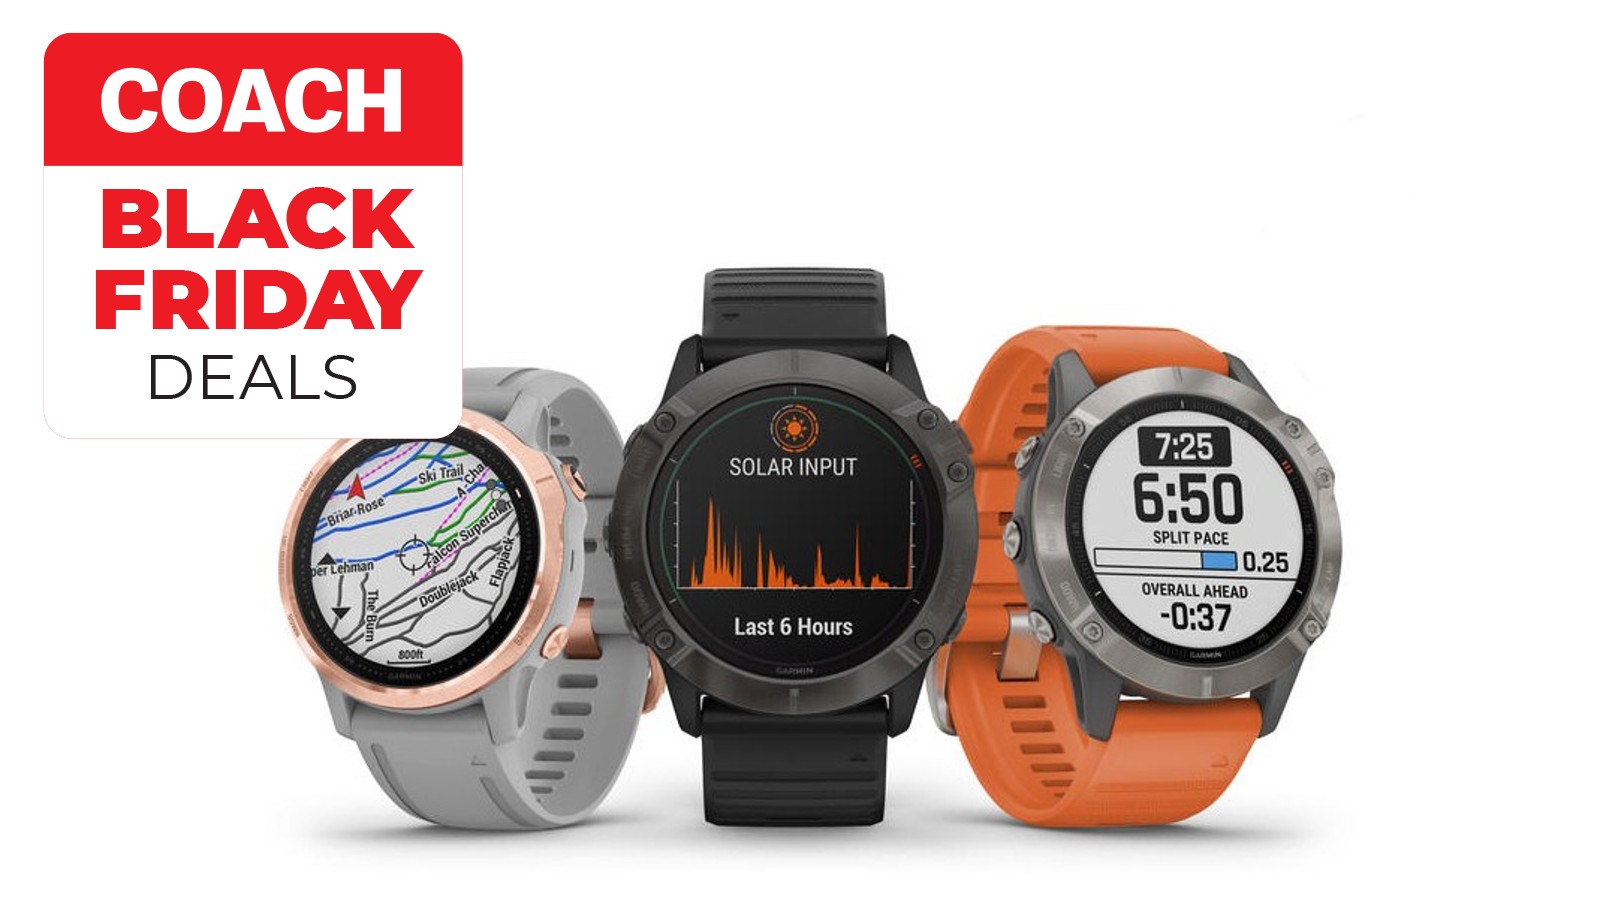 Read This Before Buying A Garmin Fenix 6 Pro In The Black Friday Sales